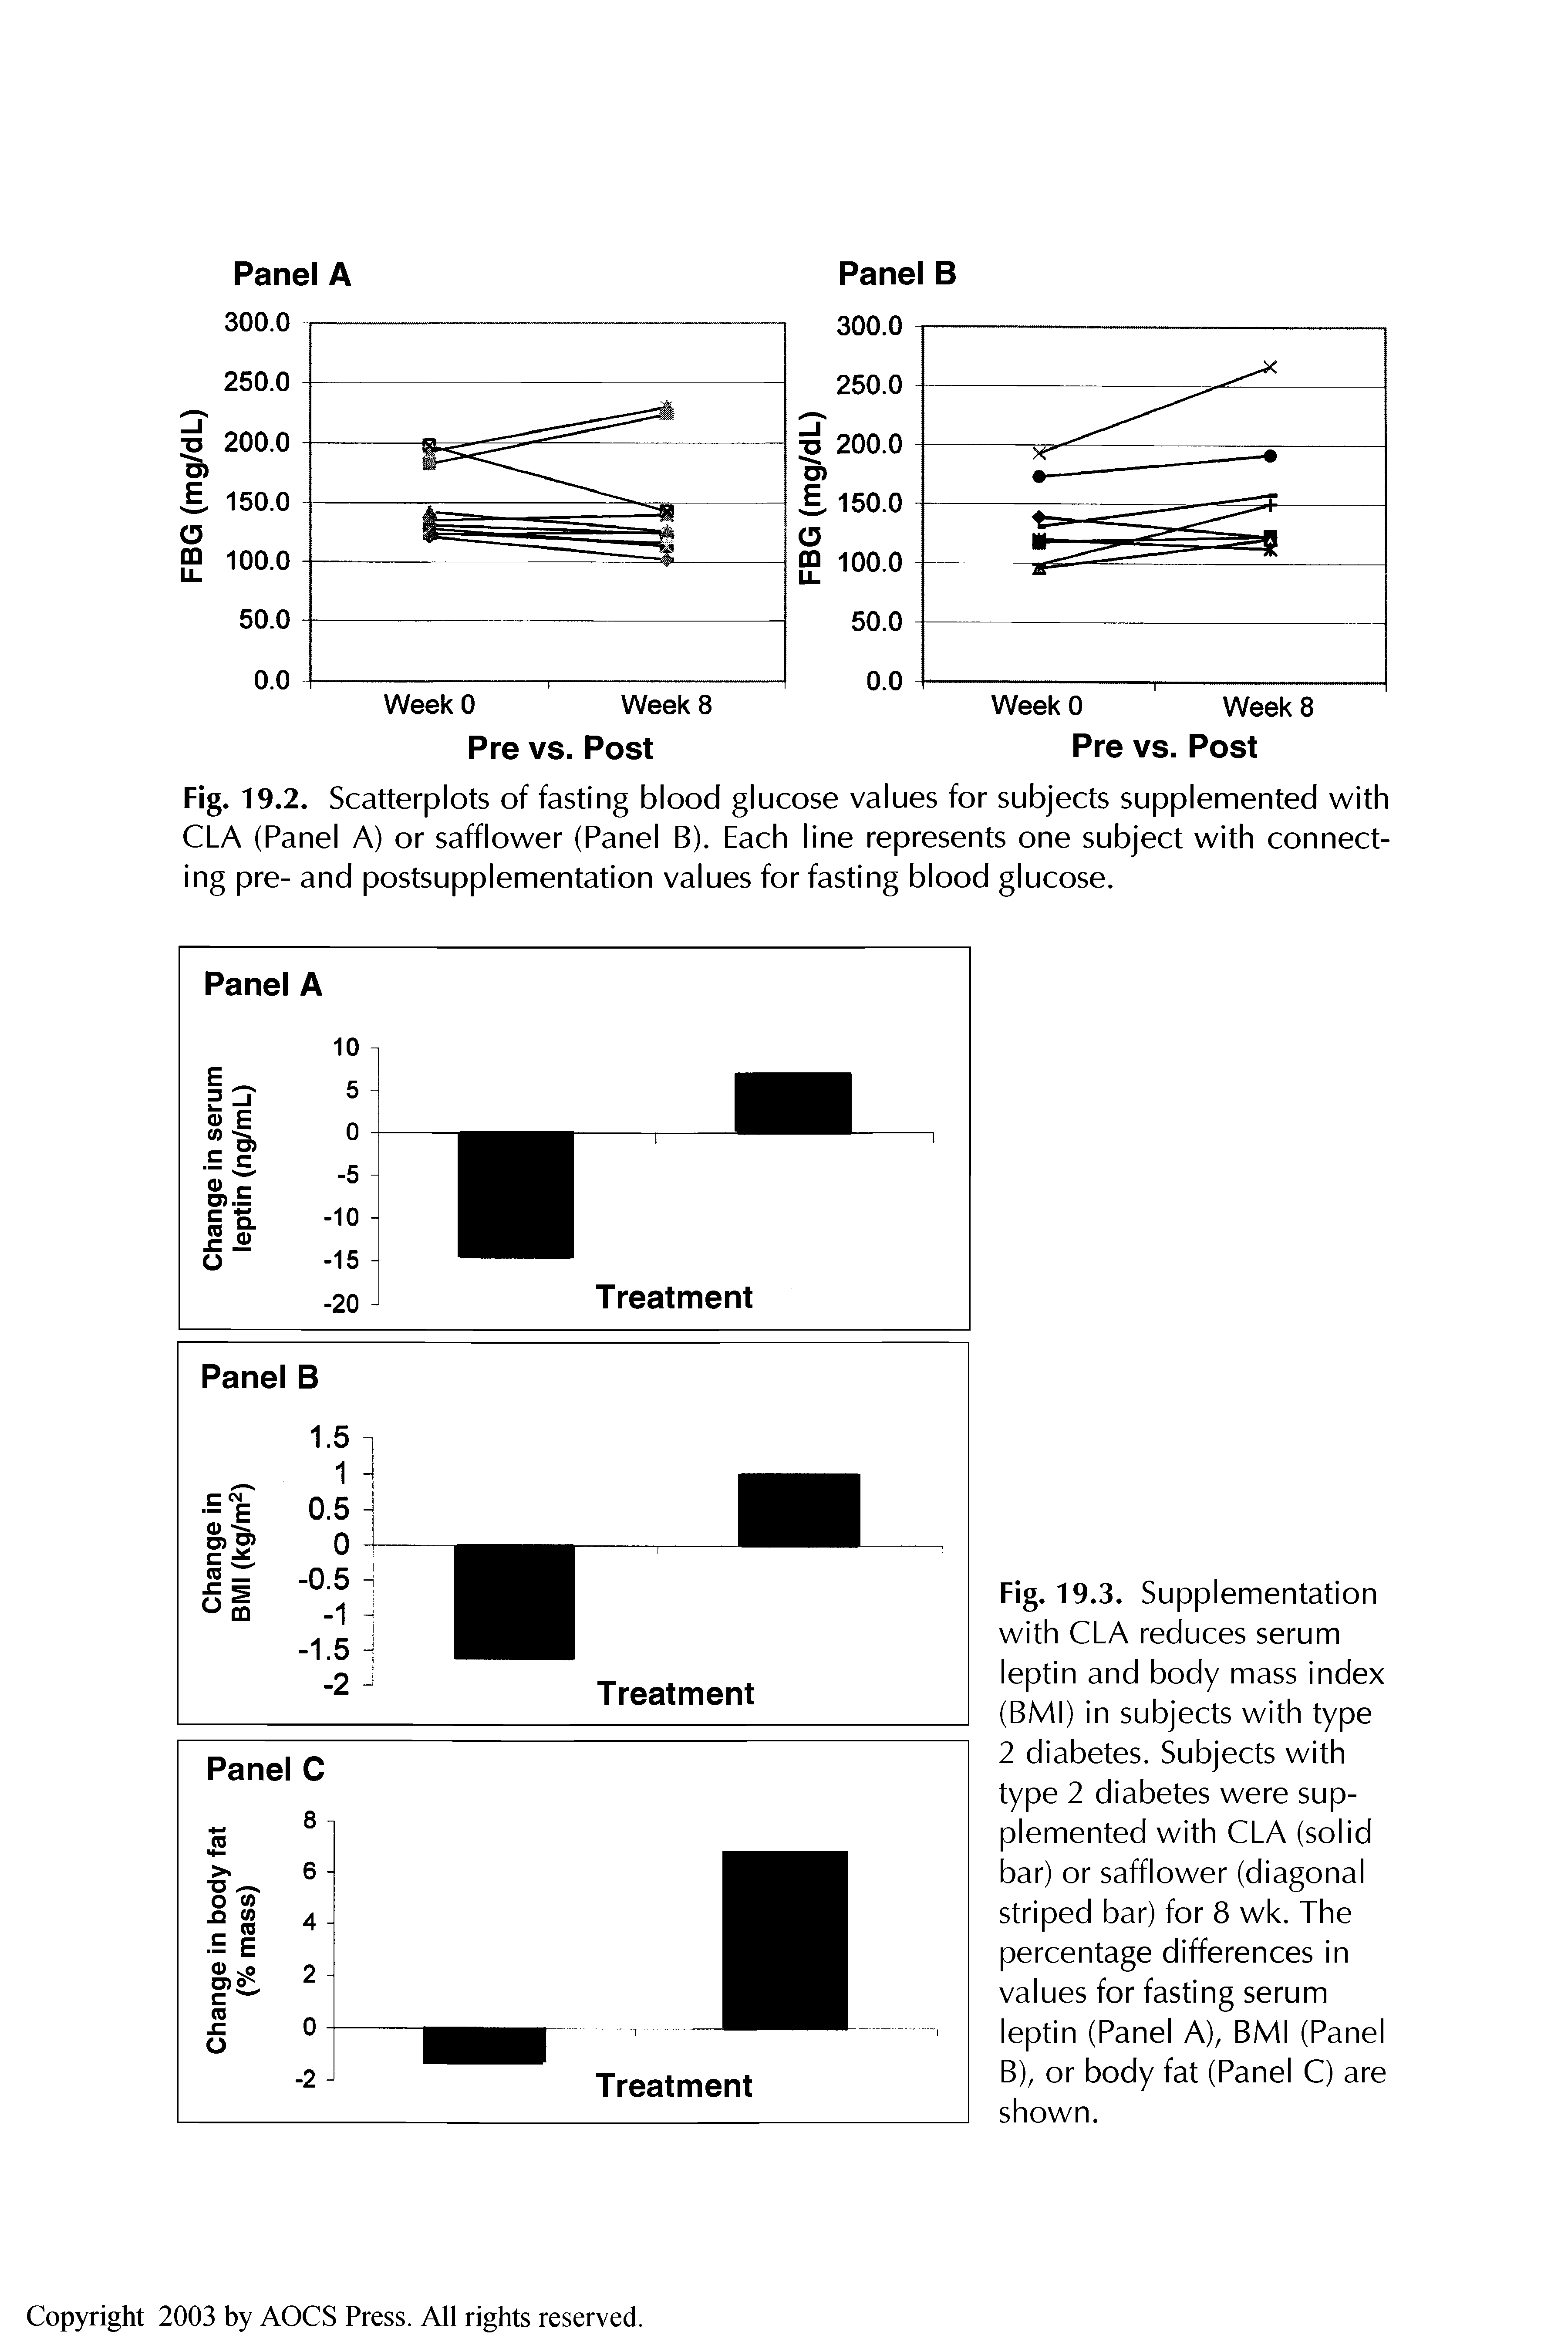 Fig. 19.3. Supplementation with CLA reduces serum leptin and body mass index (BMI) in subjects with type 2 diabetes. Subjects with type 2 diabetes were supplemented with CLA (solid bar) or safflower (diagonal striped bar) for 8 wk. The percentage differences in values for fasting serum leptin (Panel A), BMI (Panel B), or body fat (Panel C) are shown.